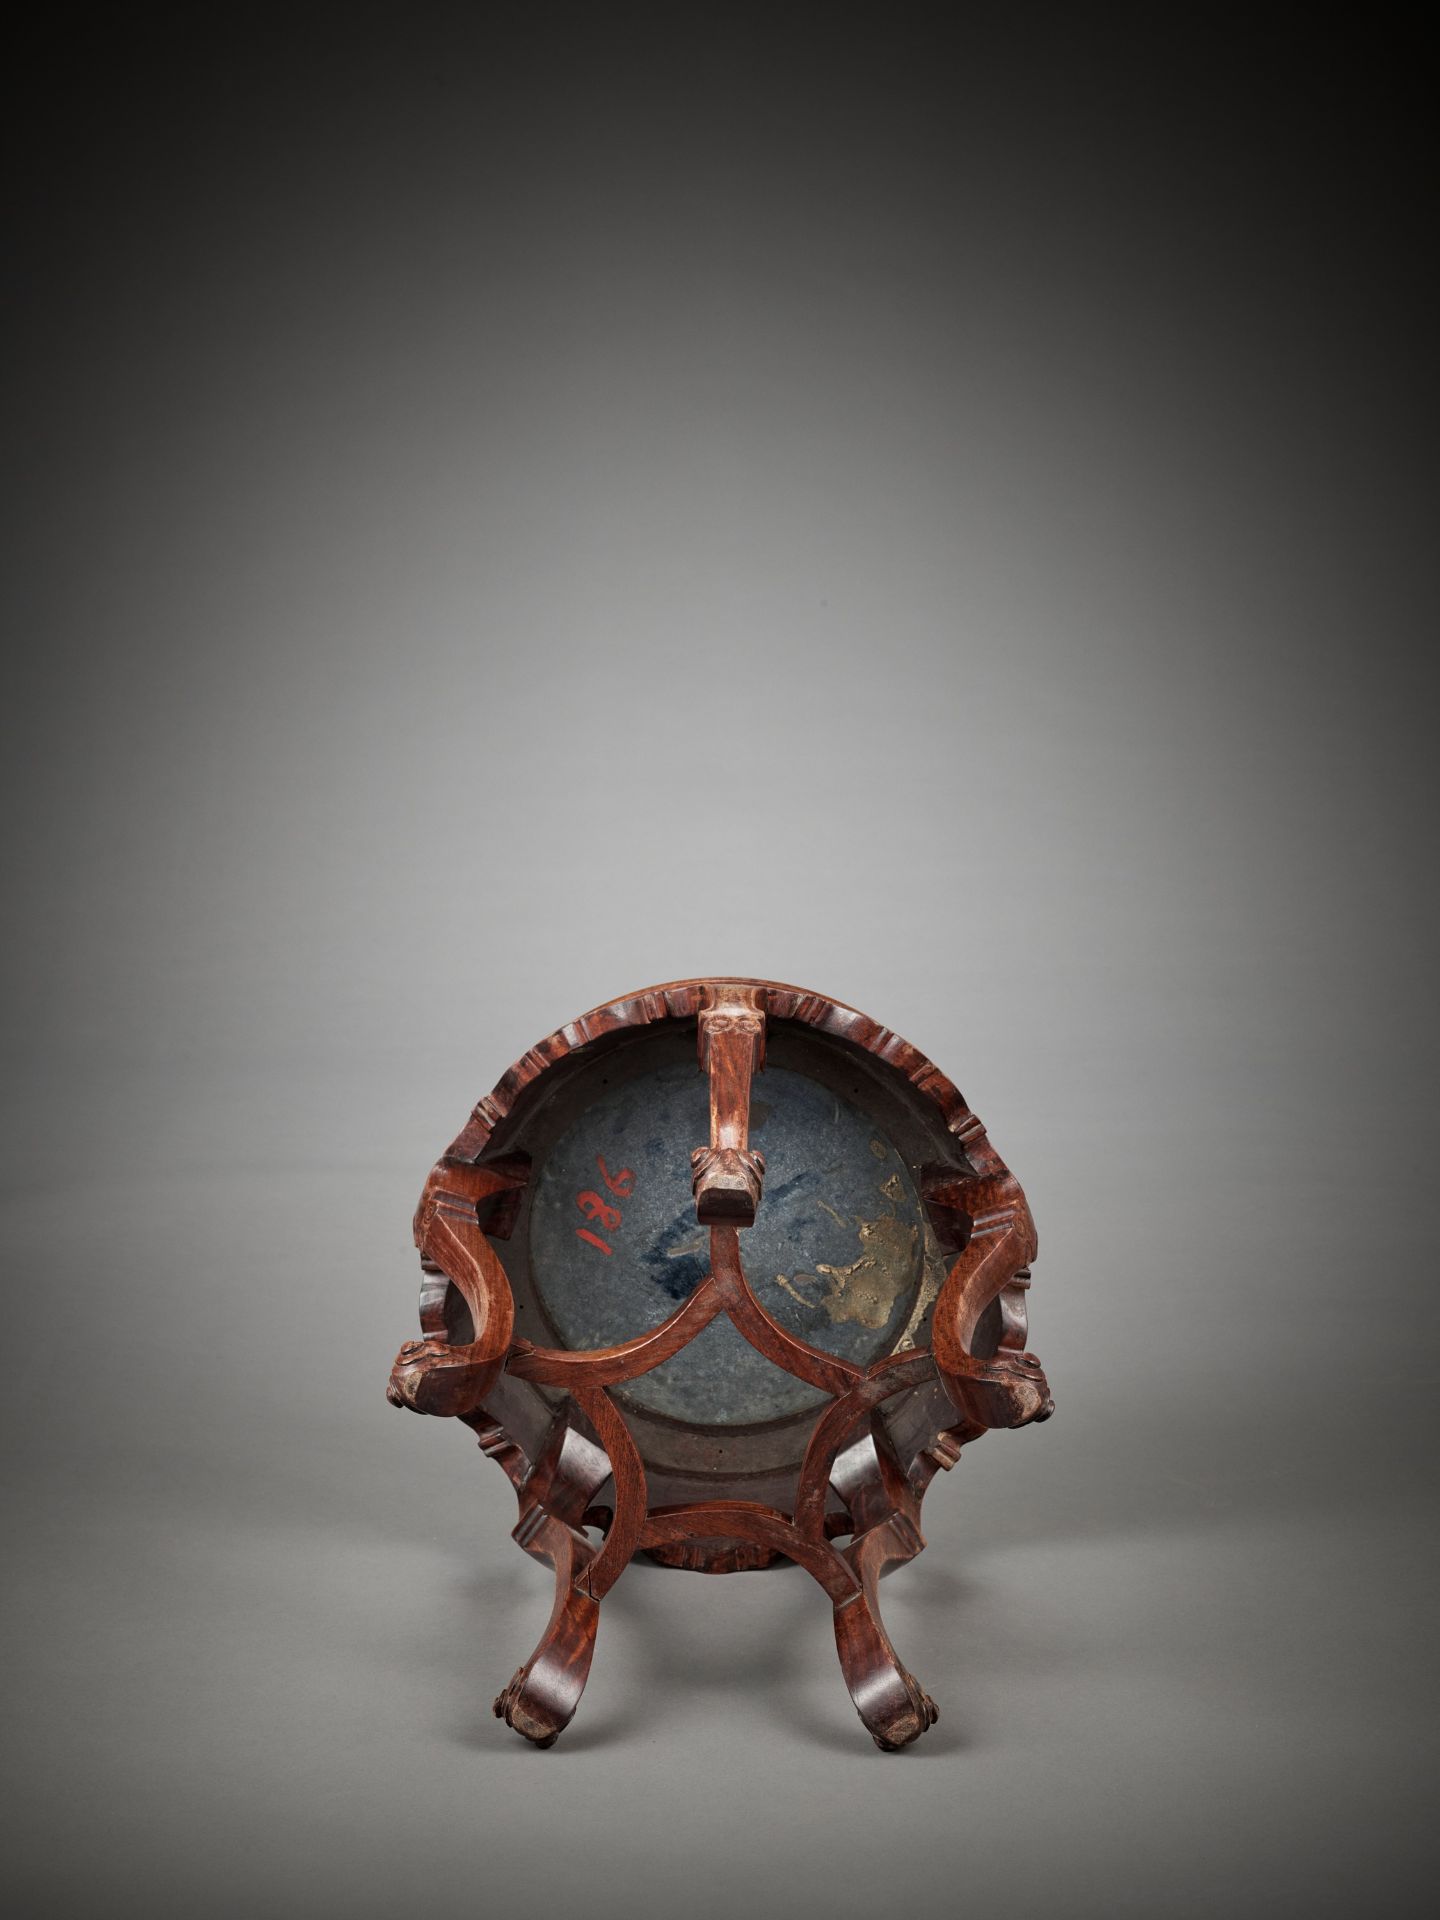 A CLOISONNE ENAMEL-INSET HARDWOOD STAND, LATE QING TO REPUBLIC - Image 8 of 8